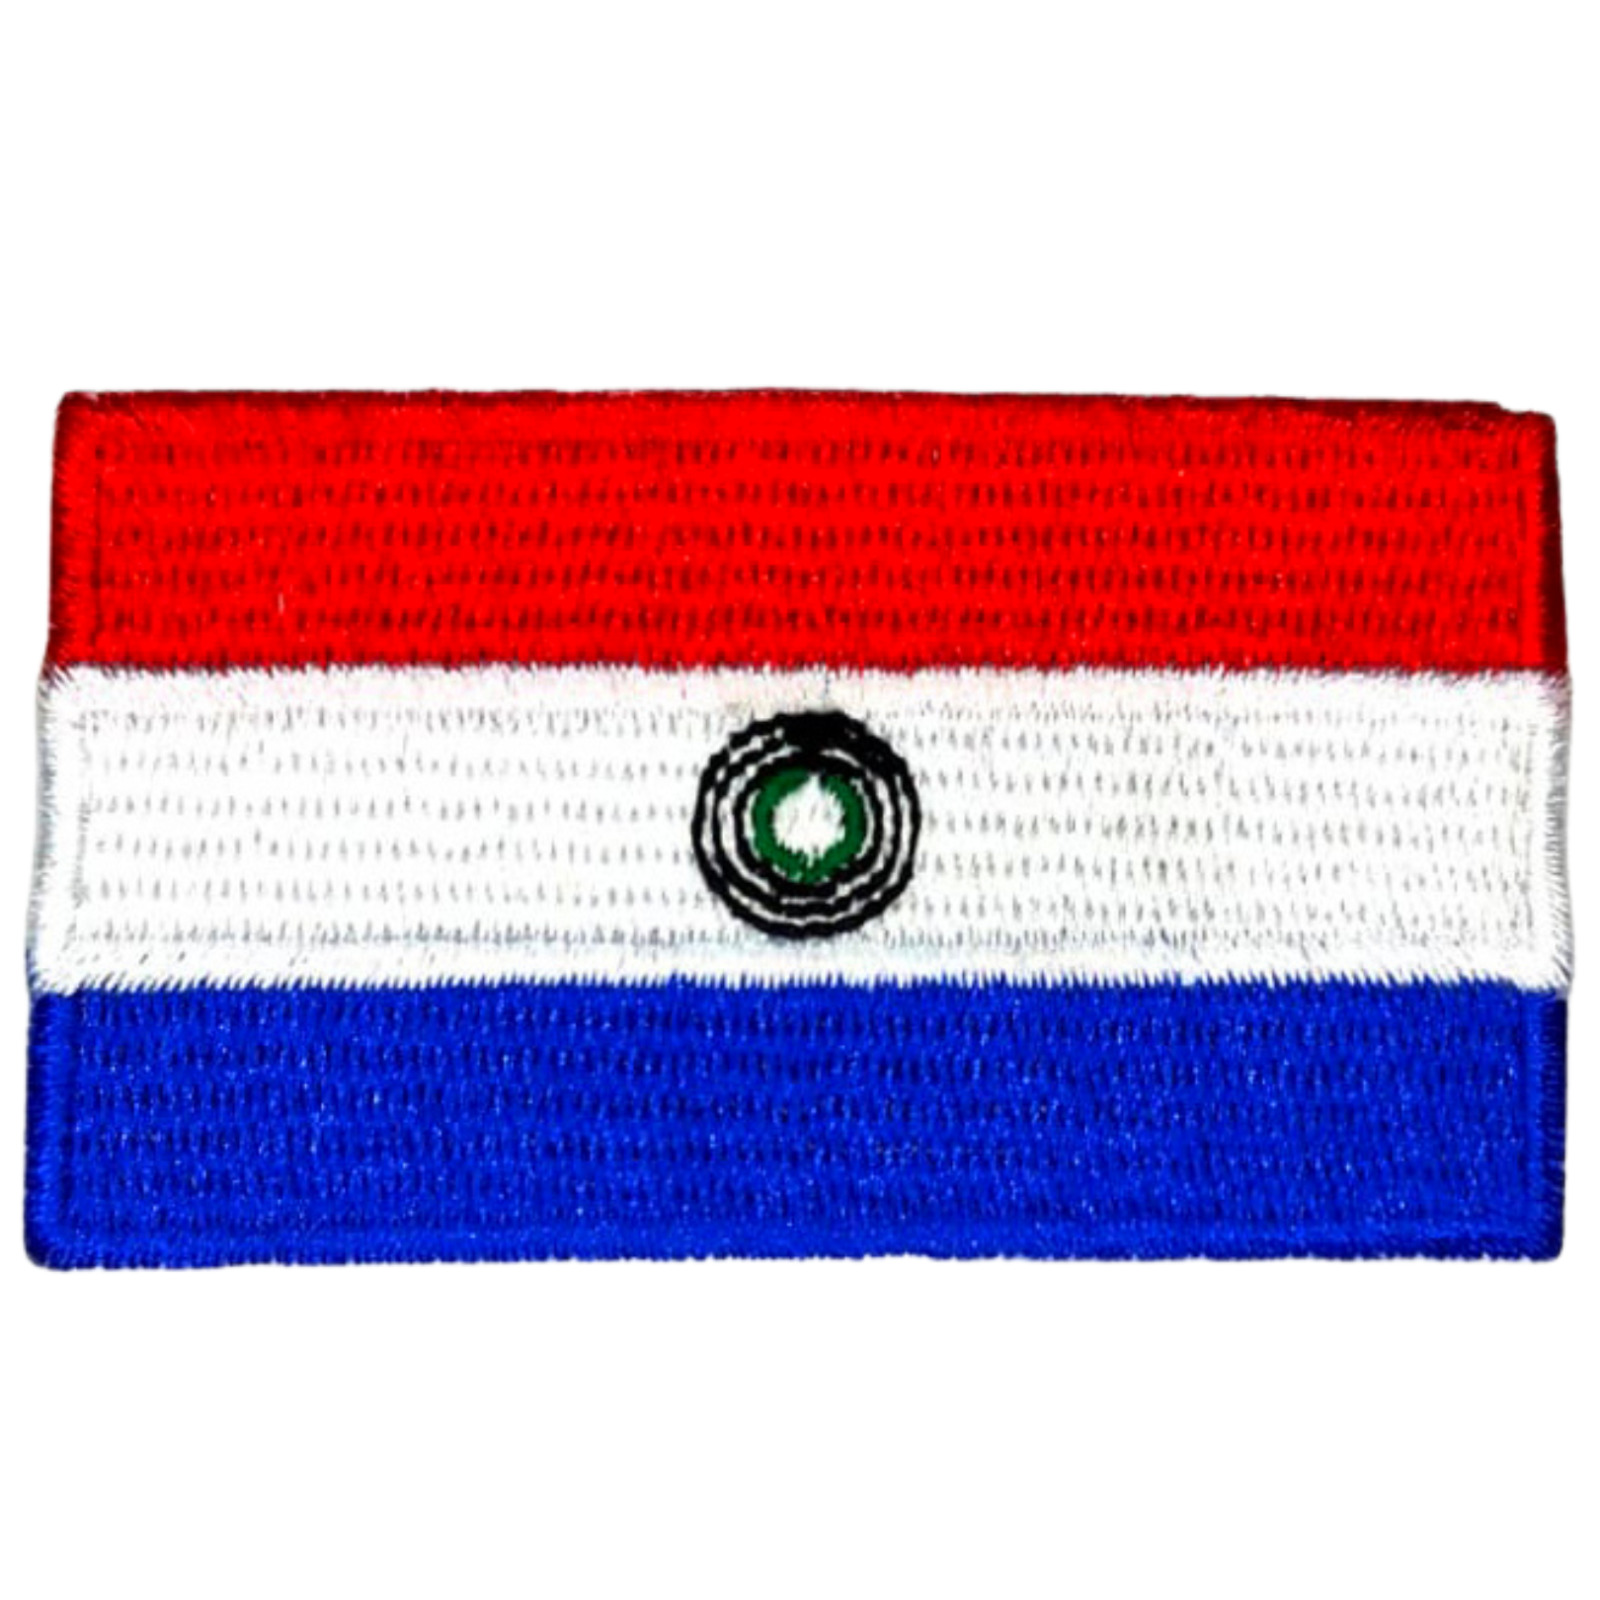 Paraguay National Country Flag Jean Jacket cloth Iron Sew on Embroidered Patch